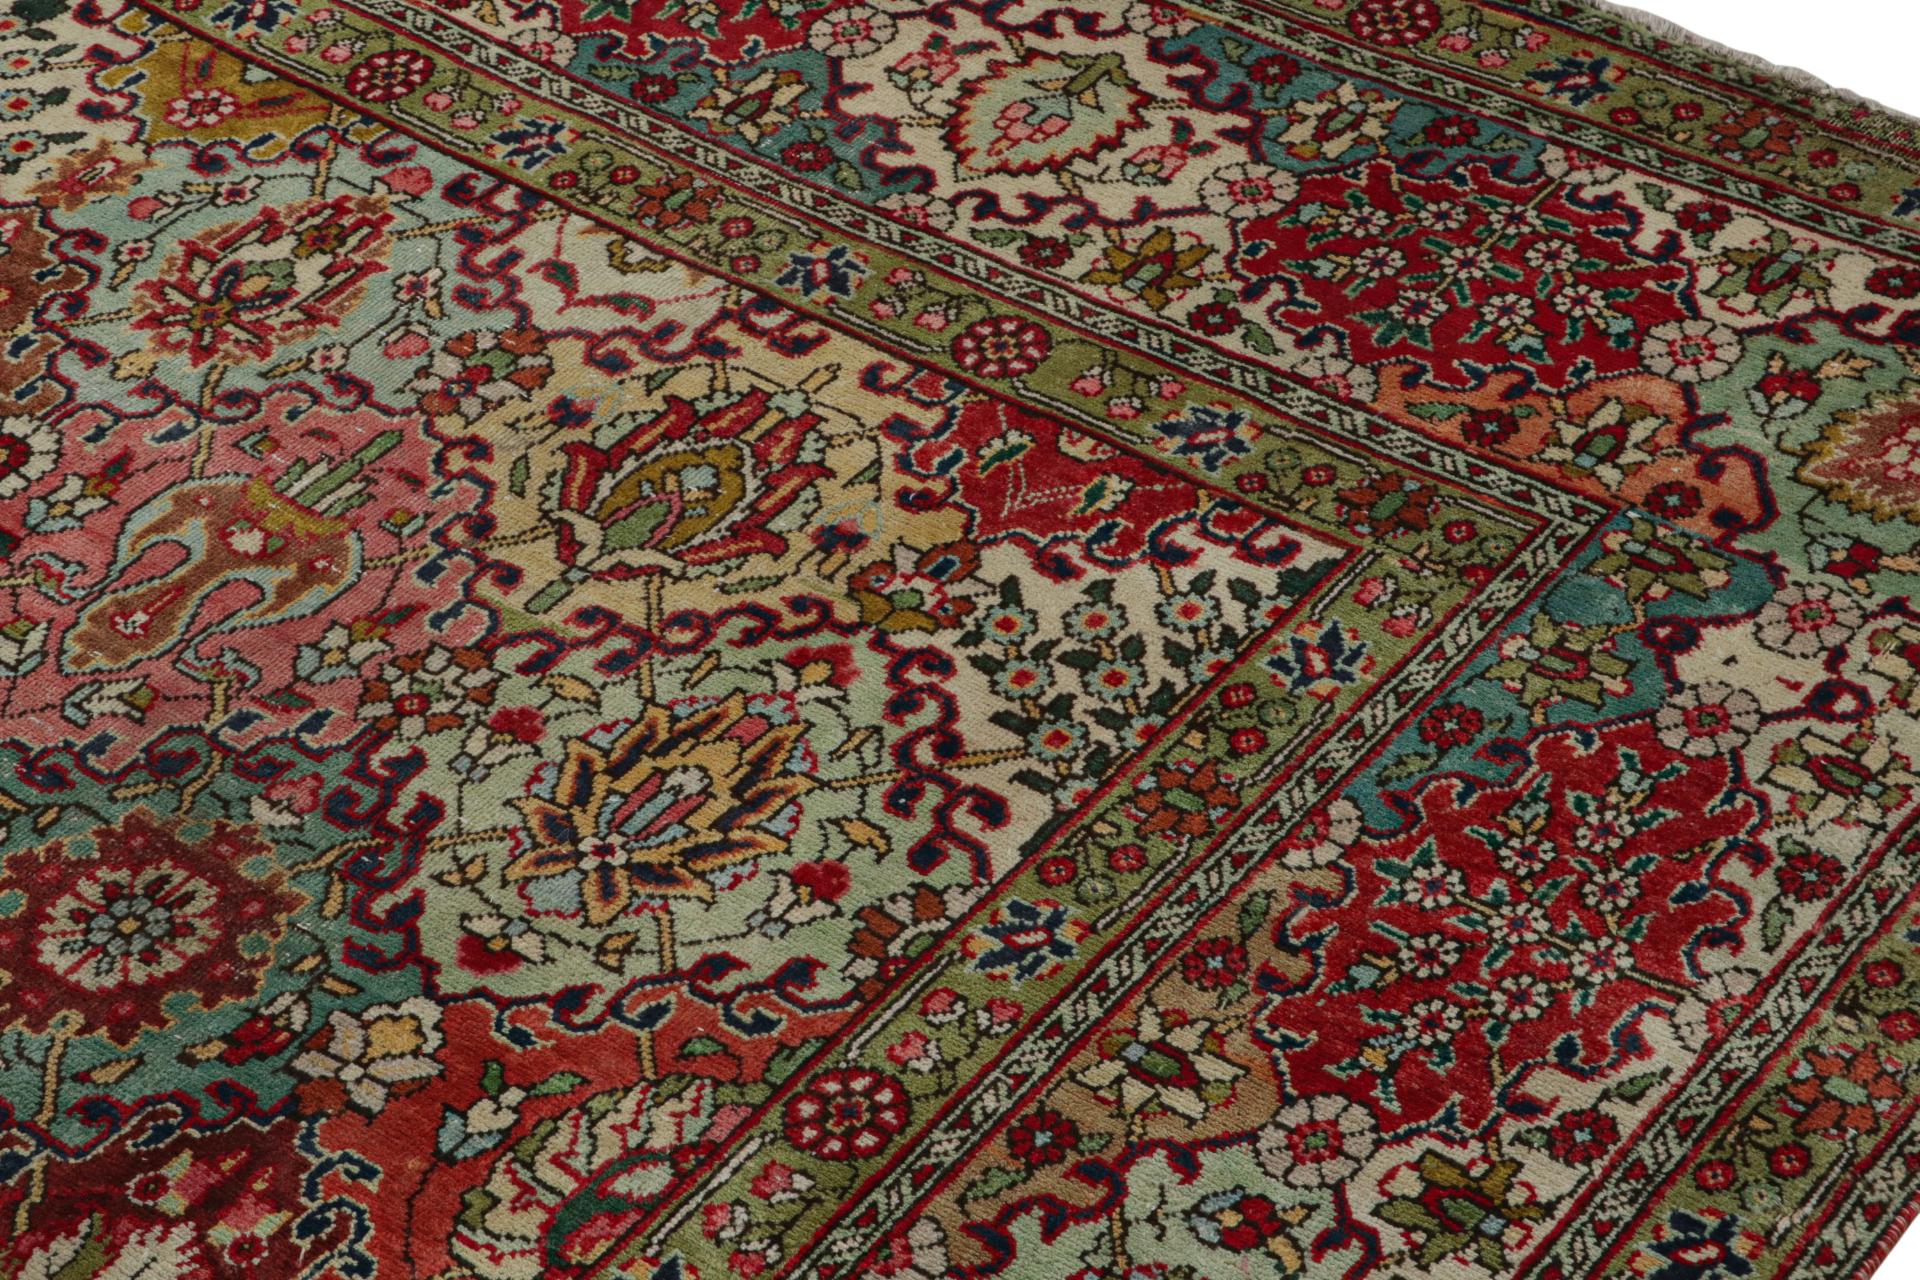 Vintage Tabriz rug in Polychromatic Floral Patterns by Rug & Kilim In Good Condition For Sale In Long Island City, NY